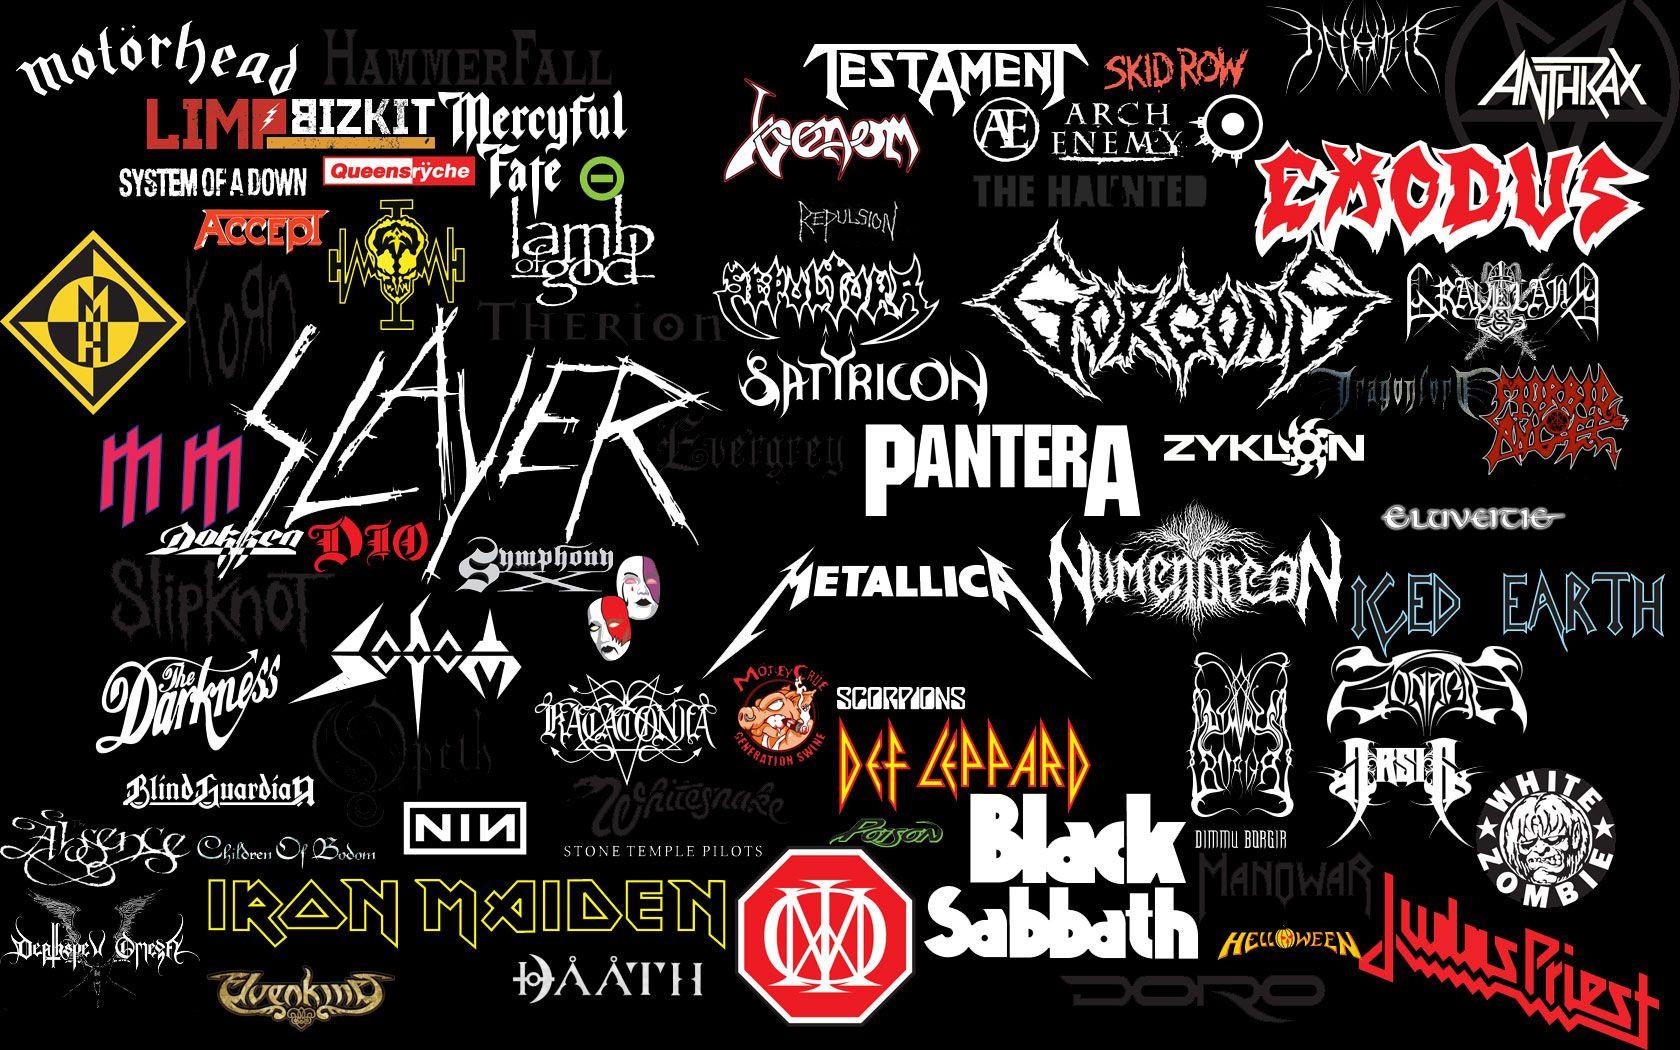 Heavy Metal Band Logo - Heavy Metal image Band Logos HD wallpaper and background photo